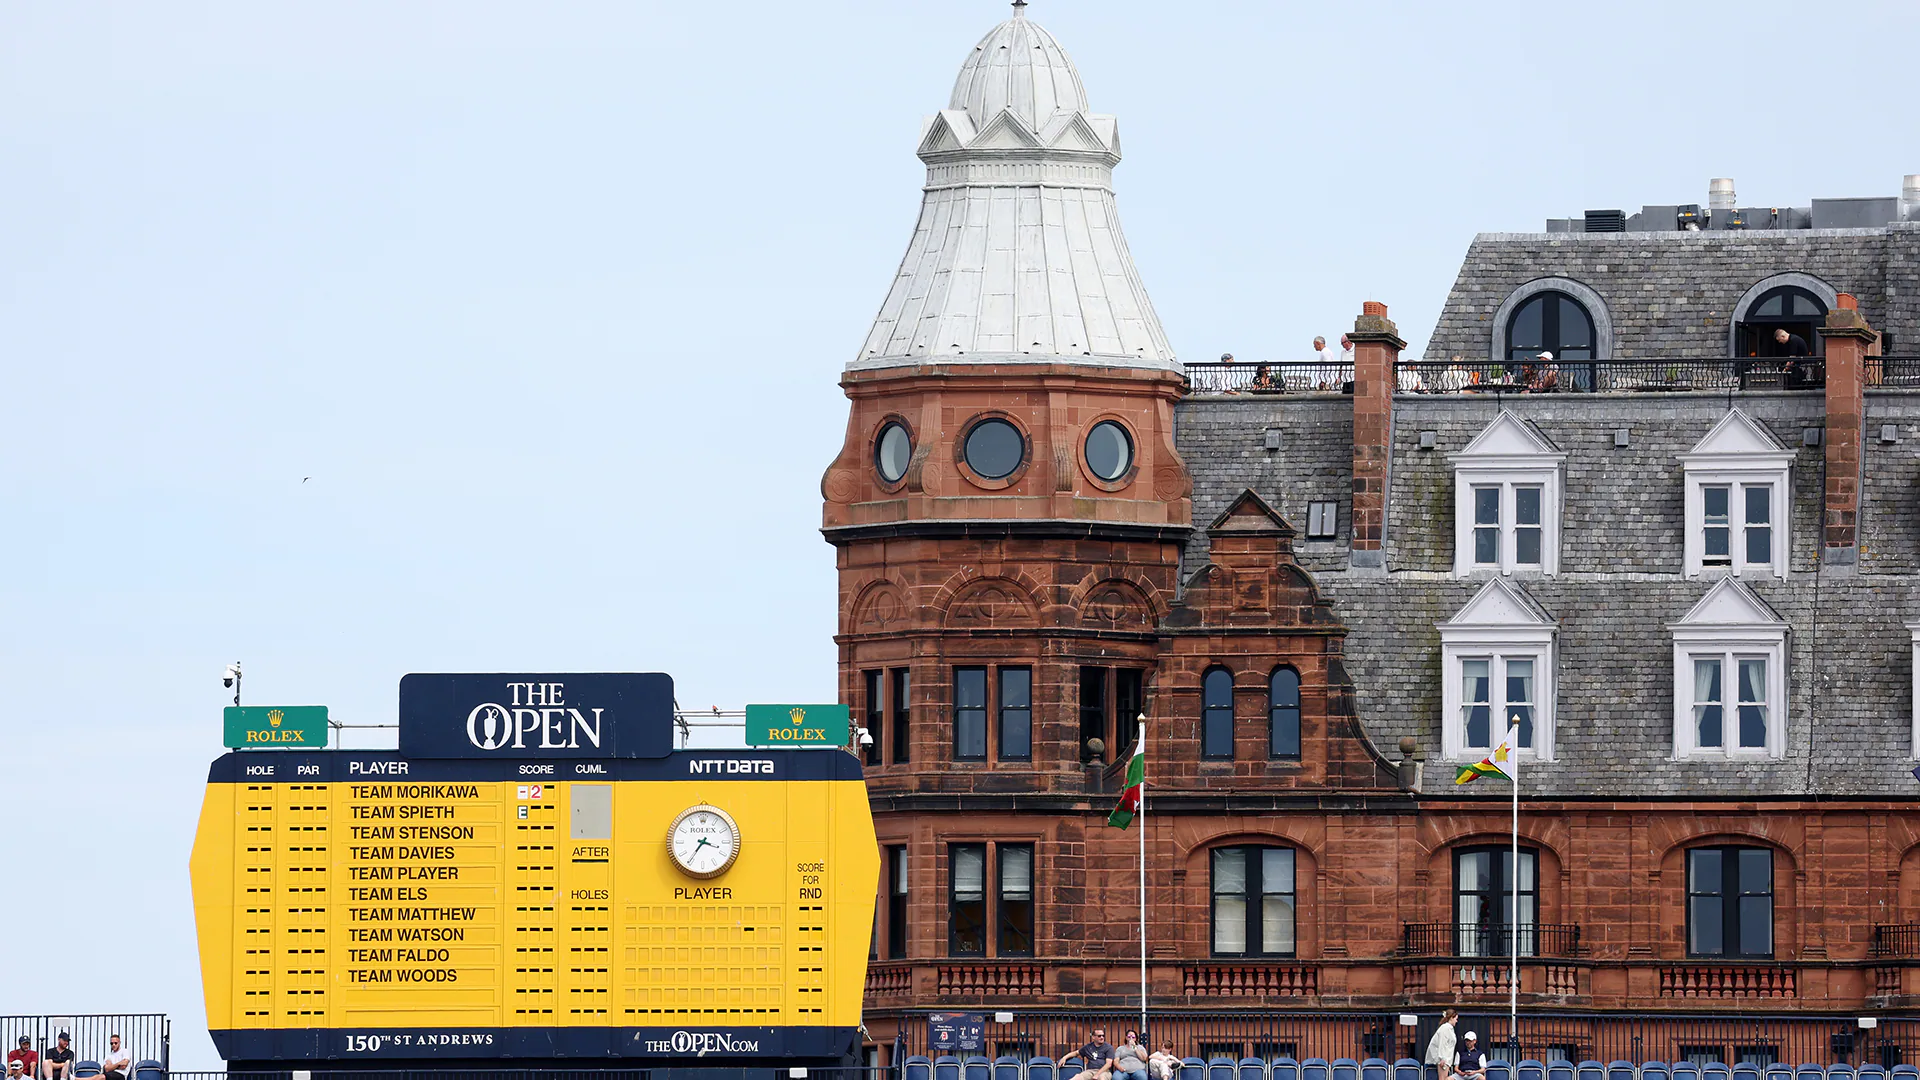 2022 British Open: Tee times for Rounds 1 and 2 for The Open Championship at St. Andrews